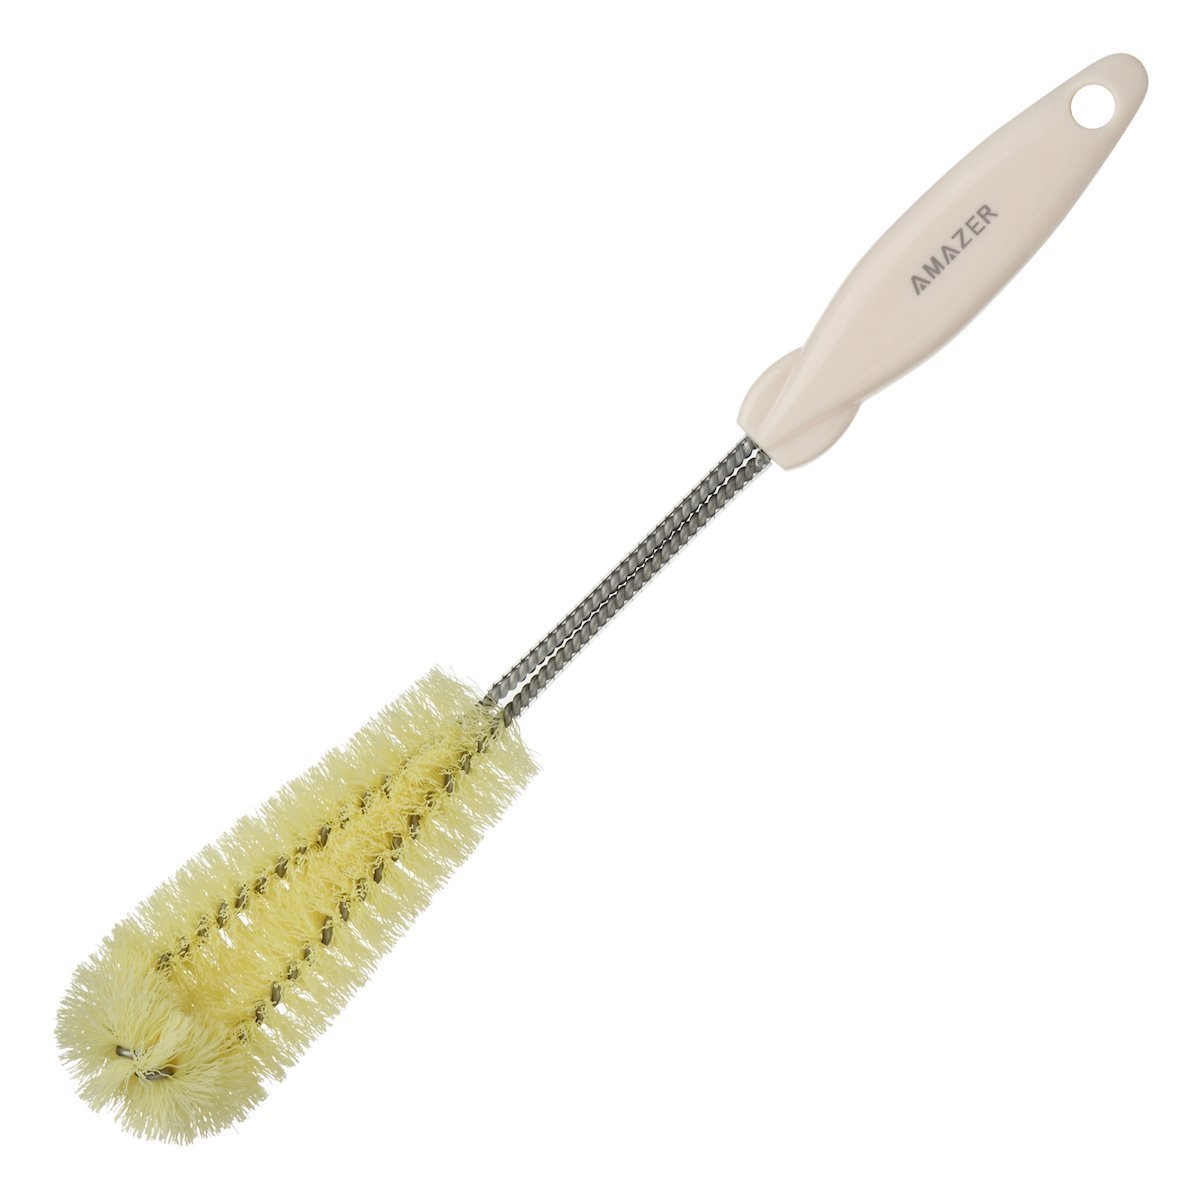 Bottle Brush With Comfort Grip Only $5.49 on Amazon!